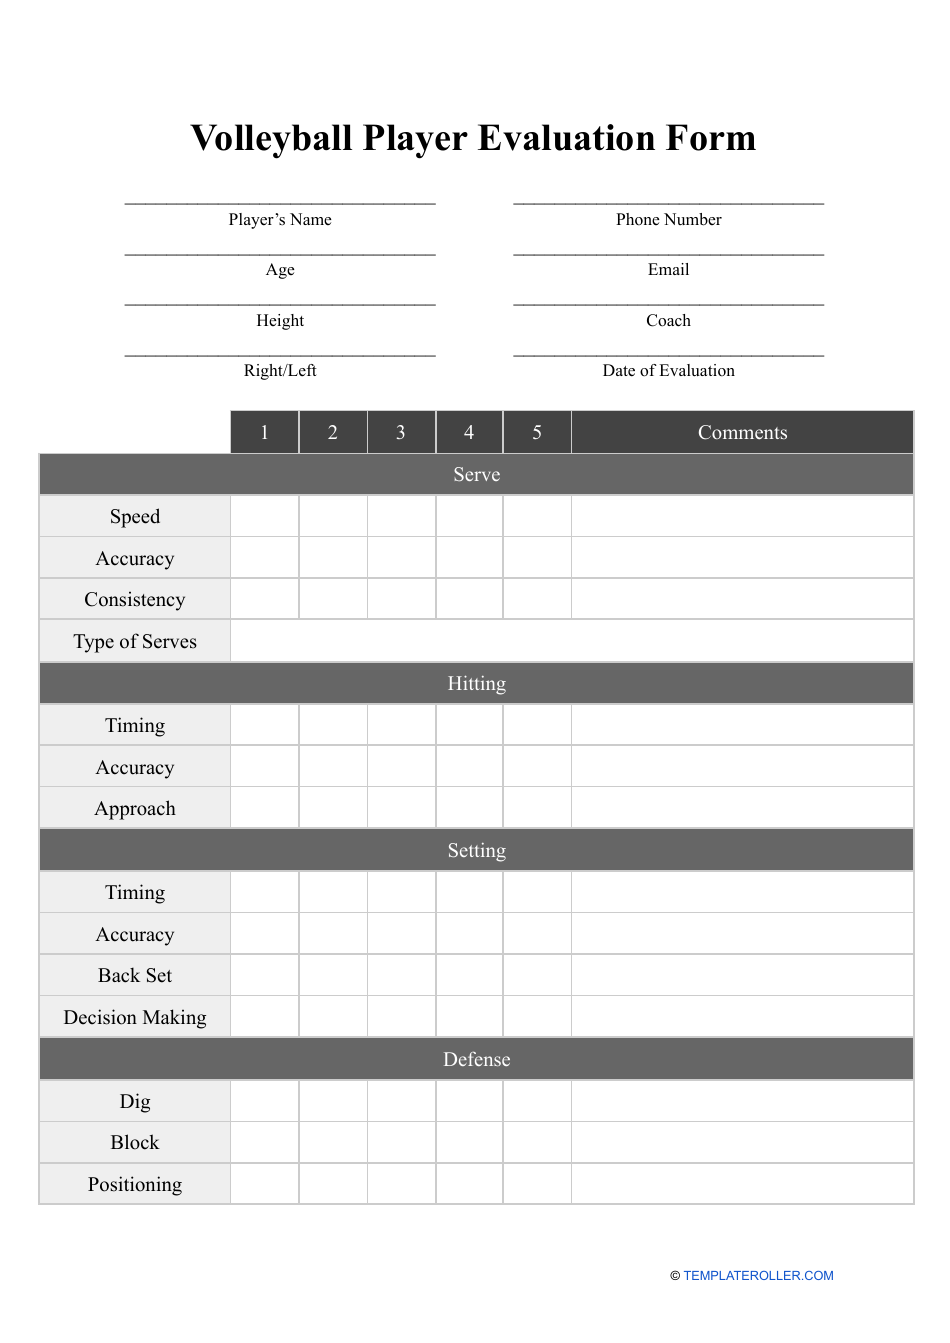 Volleyball Player Evaluation Form, Page 1